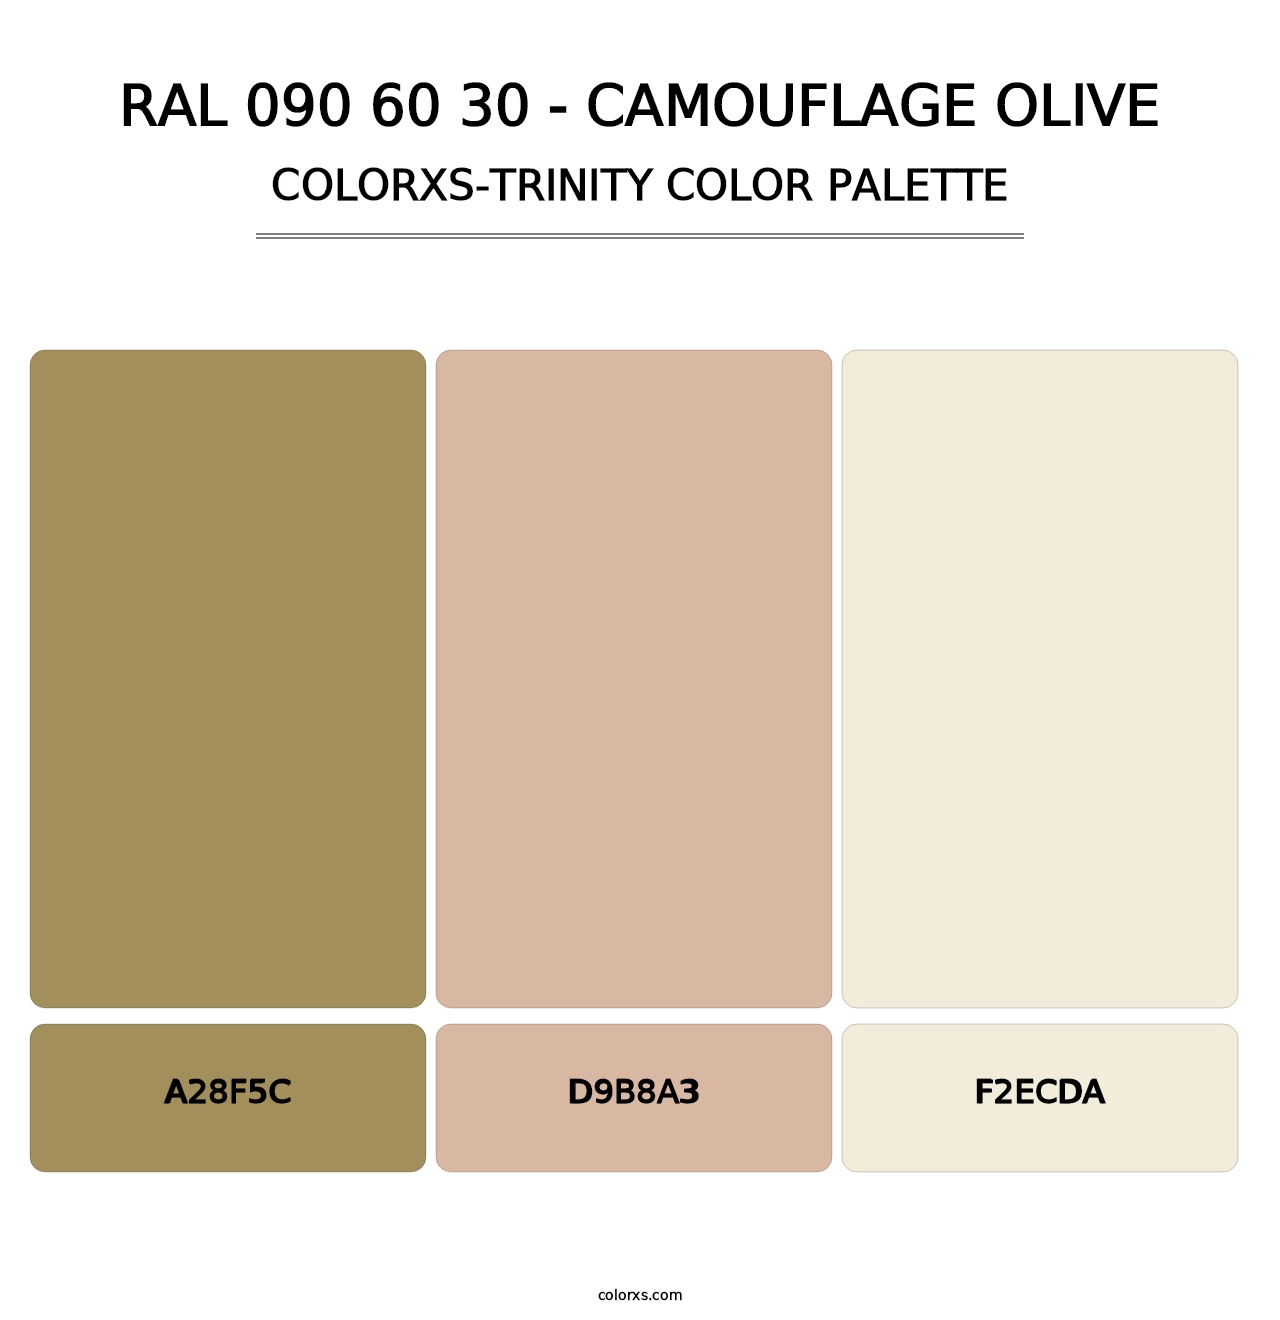 RAL 090 60 30 - Camouflage Olive - Colorxs Trinity Palette